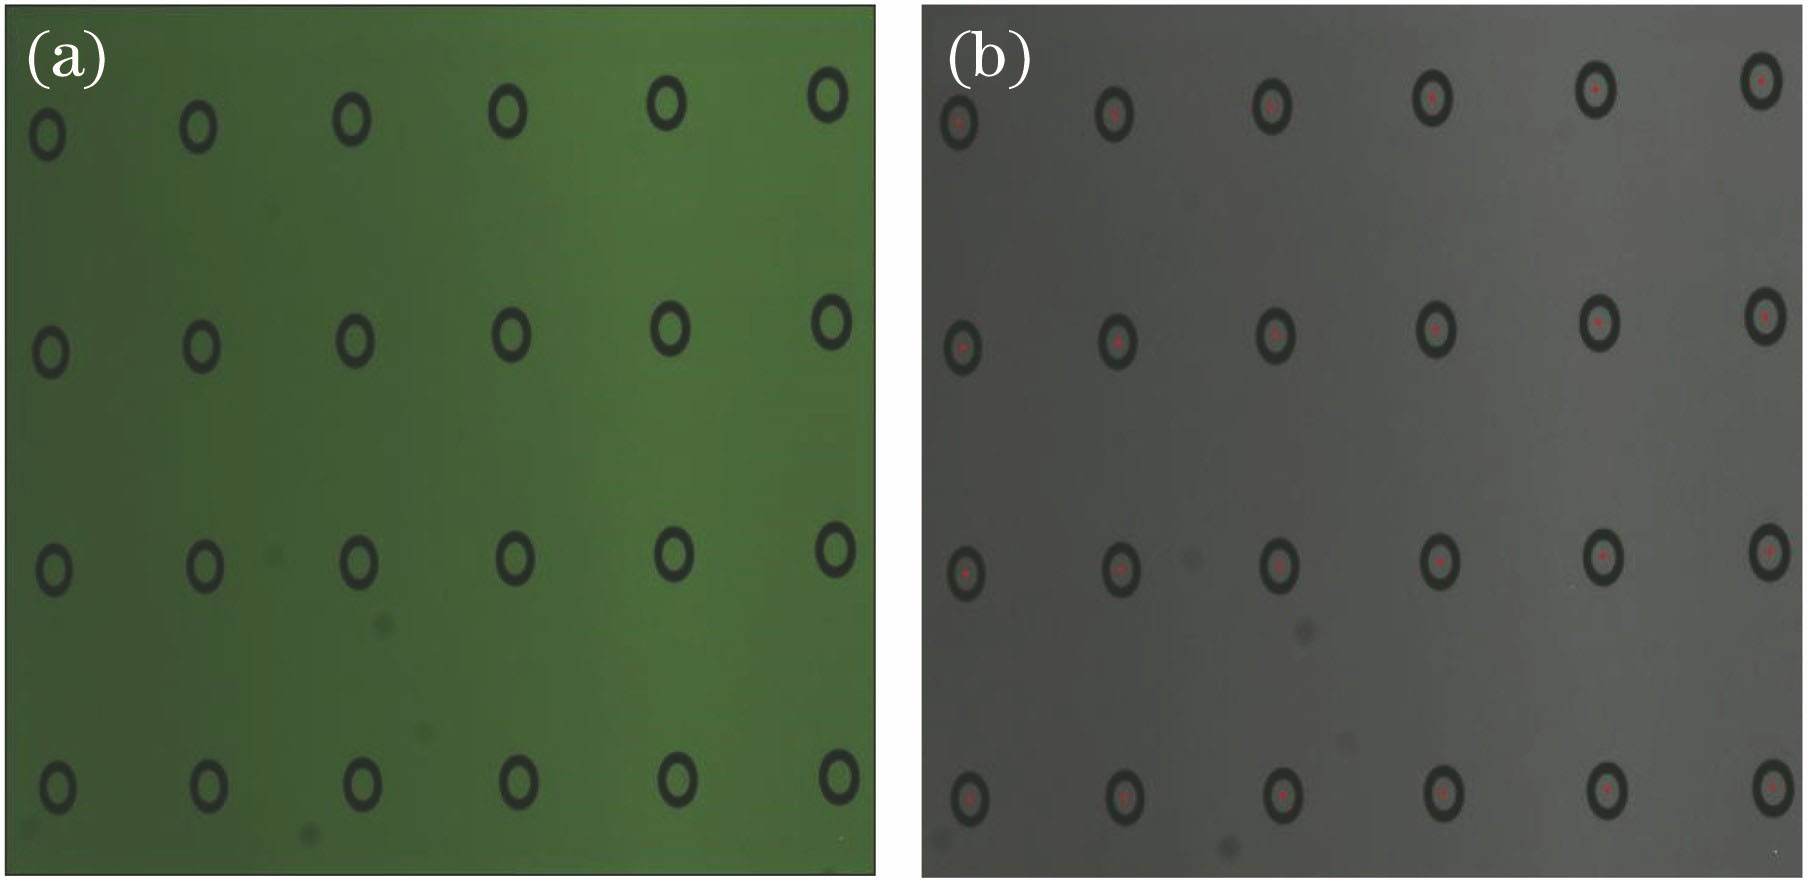 Images of hollow ring marker matrix captured by the camera. (a) Texture image; (b) red dots representing the center of each hollow ring marker